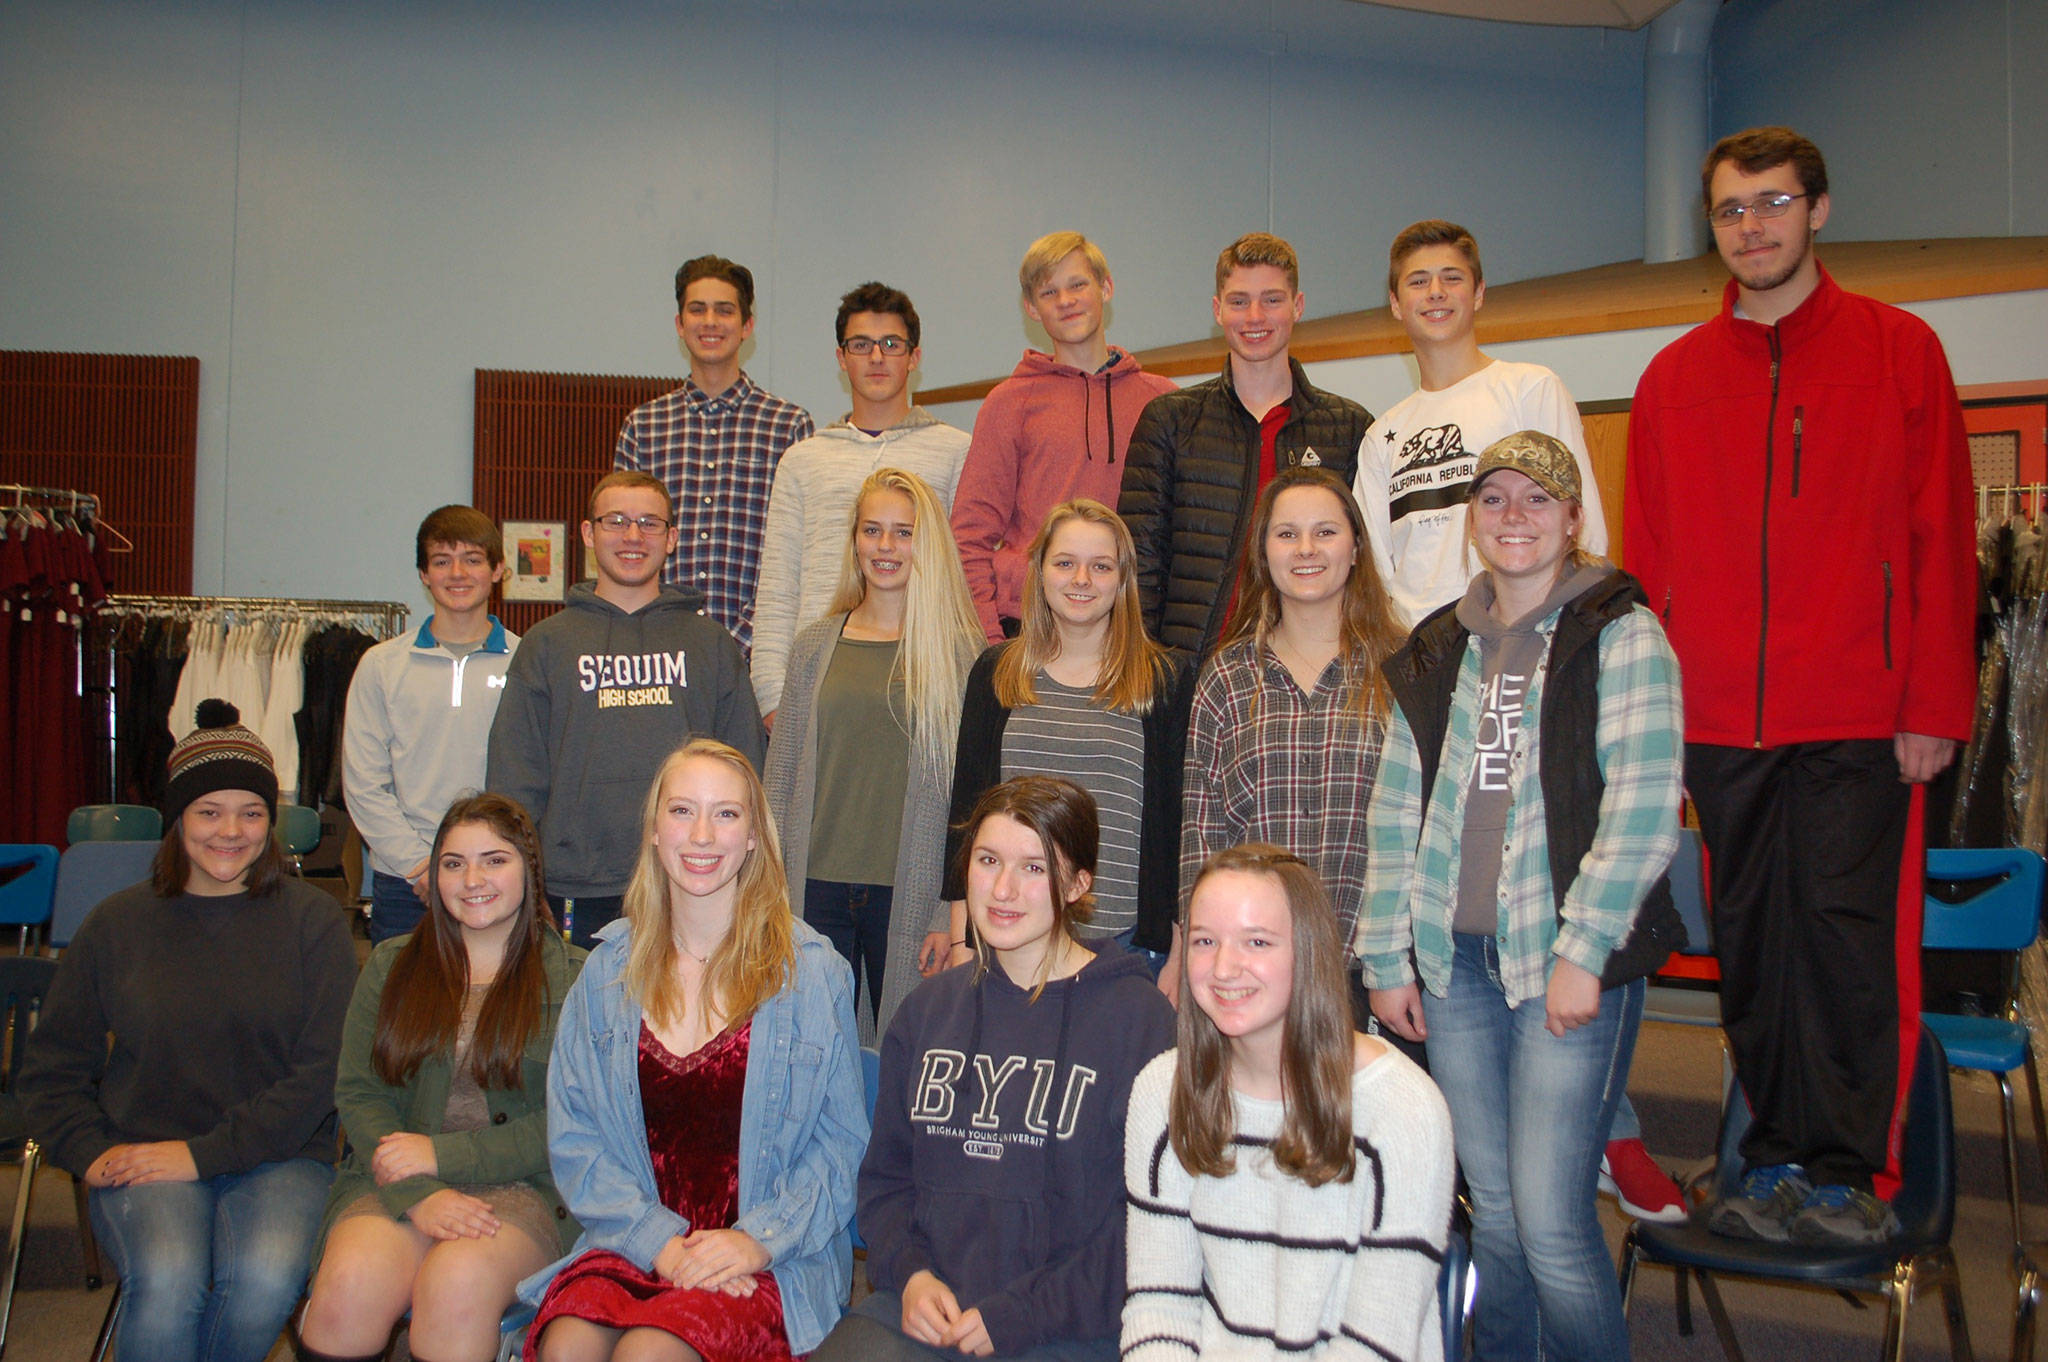 Twenty Sequim High School students were accepted to attend Washington’s All-State Choir in Yakima in 2018. At top from left are Evan James, Thomas Hughes, Jonathan Heintz, Jax Thaxton, Adrian Funston and Damien Cundiff; in the middle row are Joey Oliver, Joe Benjamin, Eden Johnson, Kaitlyn Davis, Eva Lofstrom and Shelby Wells; in the bottom row are Gabi Simonson, Isabella Fazio, Abby Norman, Audrey Hughes and Amanda Weller. They are 17 of the students selected to participate. (Erin Hawkins/Olympic Peninsula News Group)